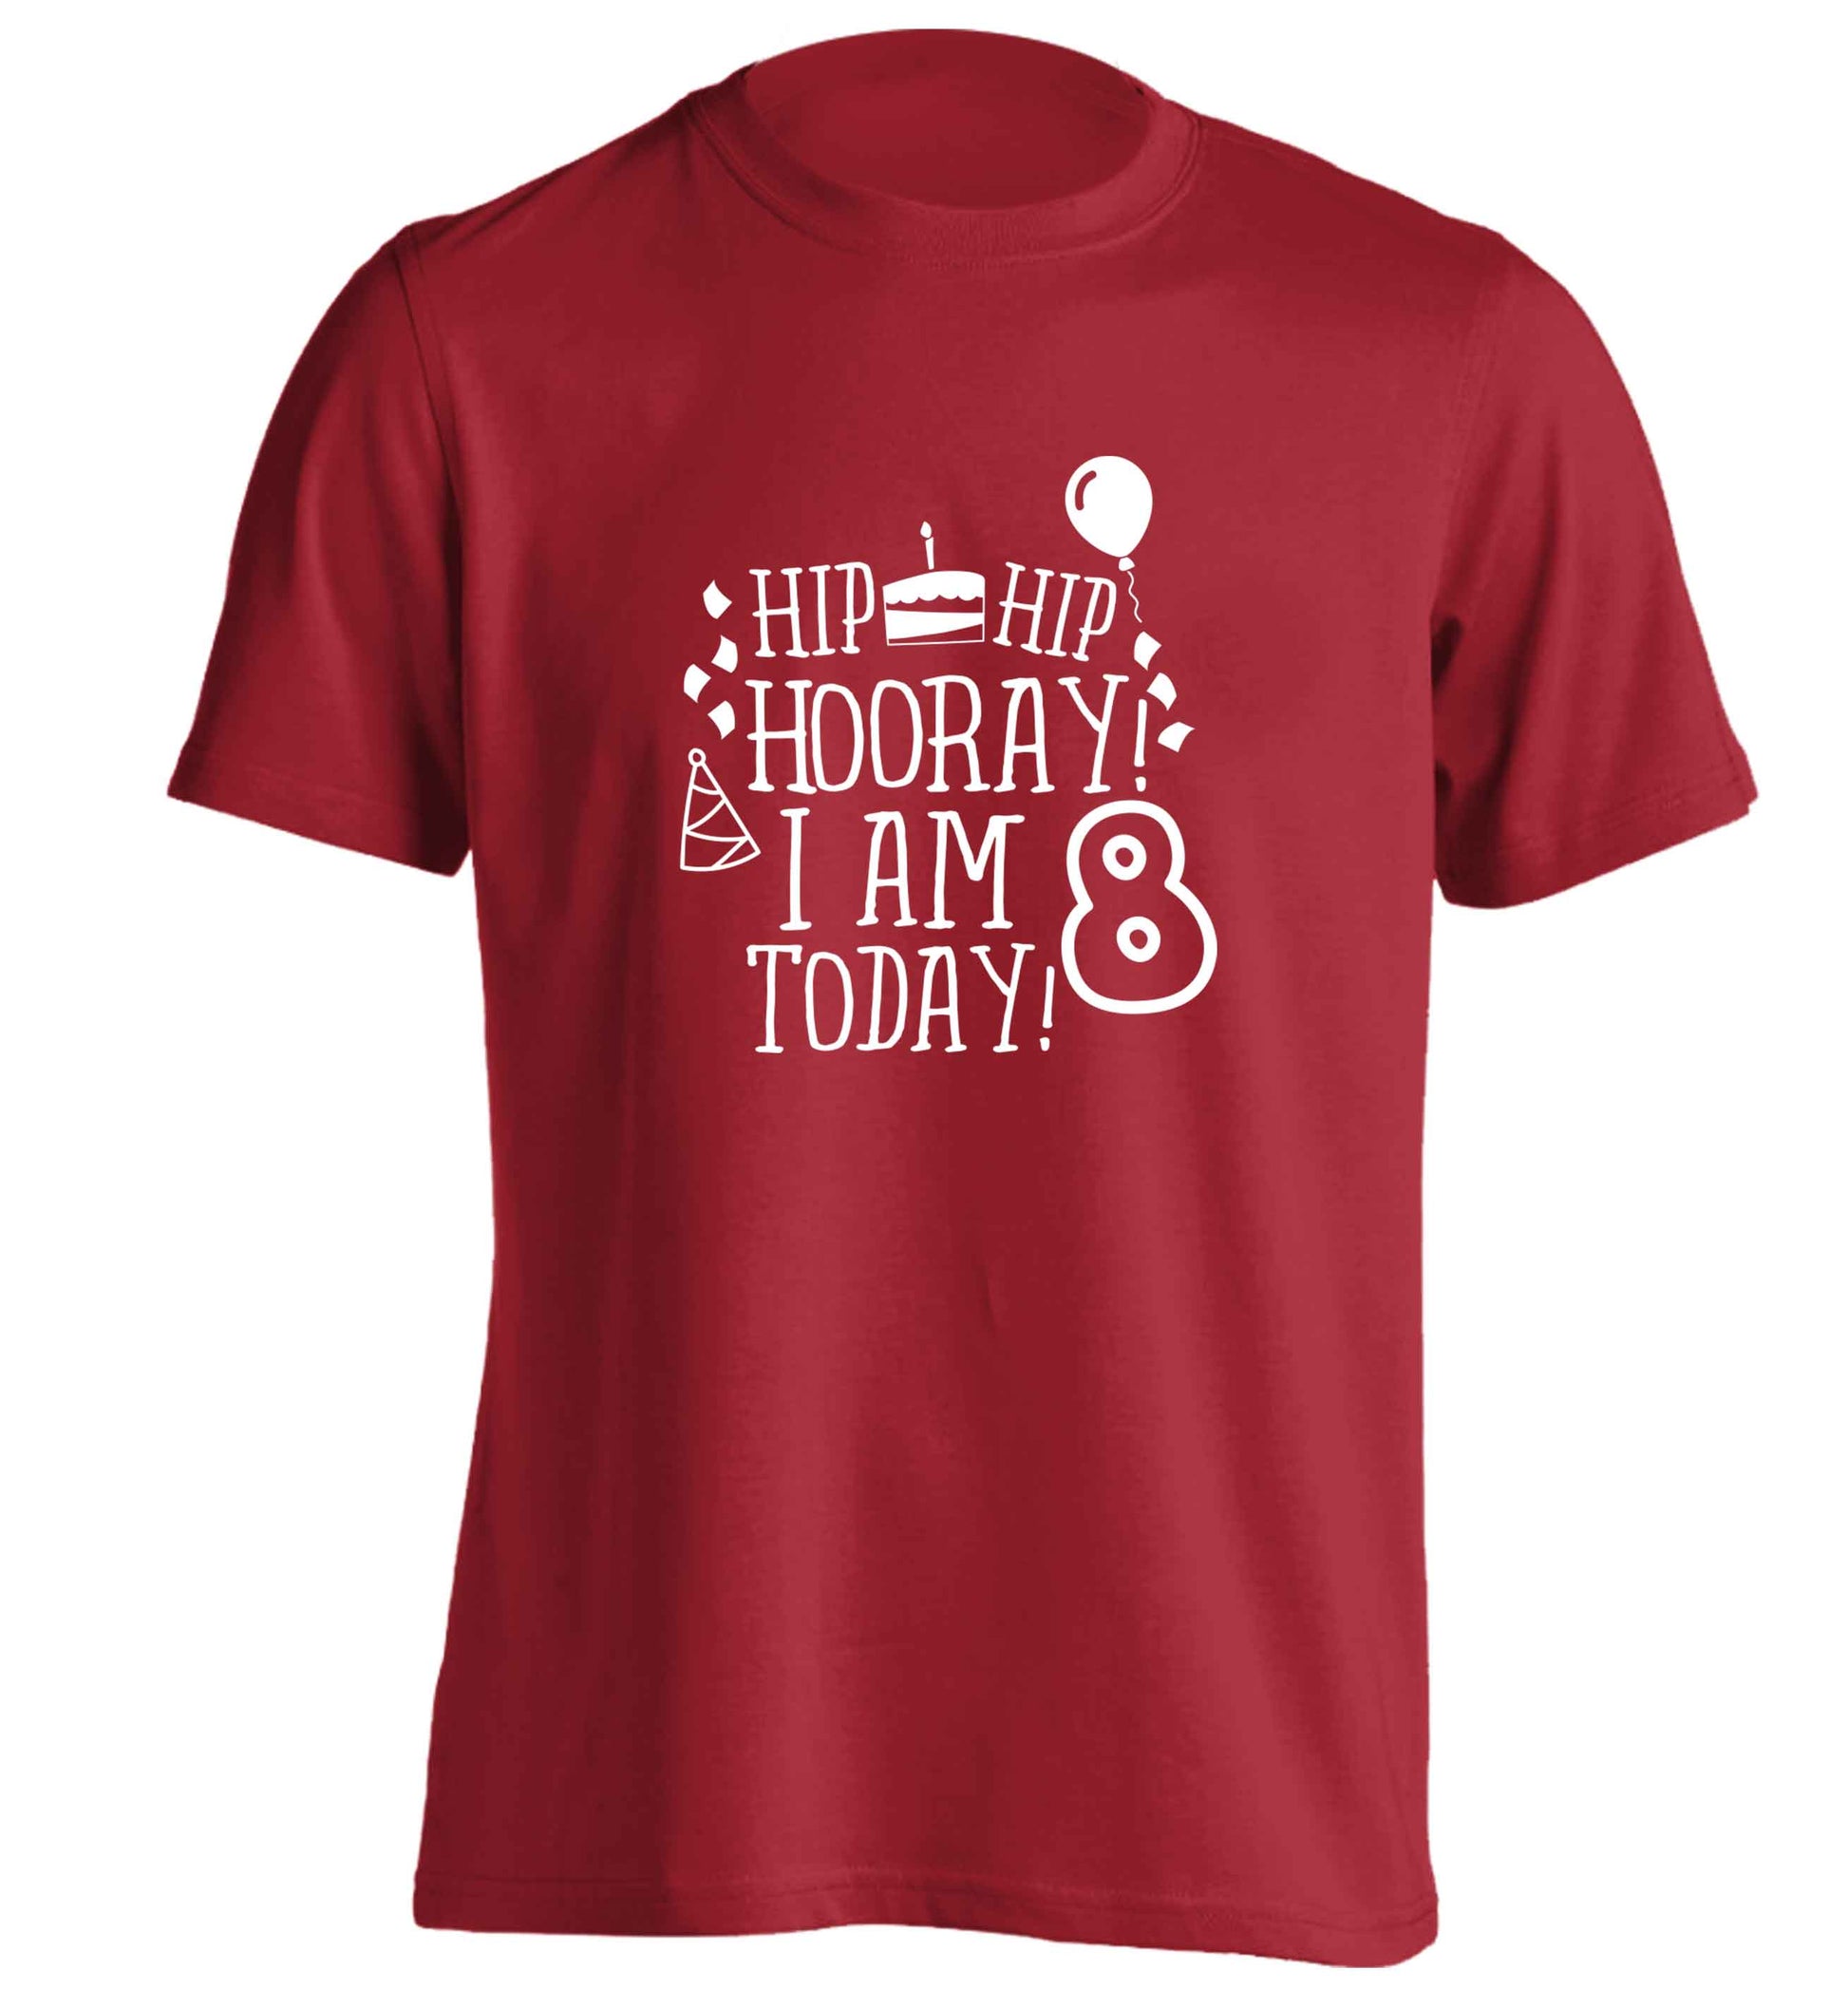 Hip hip hooray I am 8 today! adults unisex red Tshirt 2XL